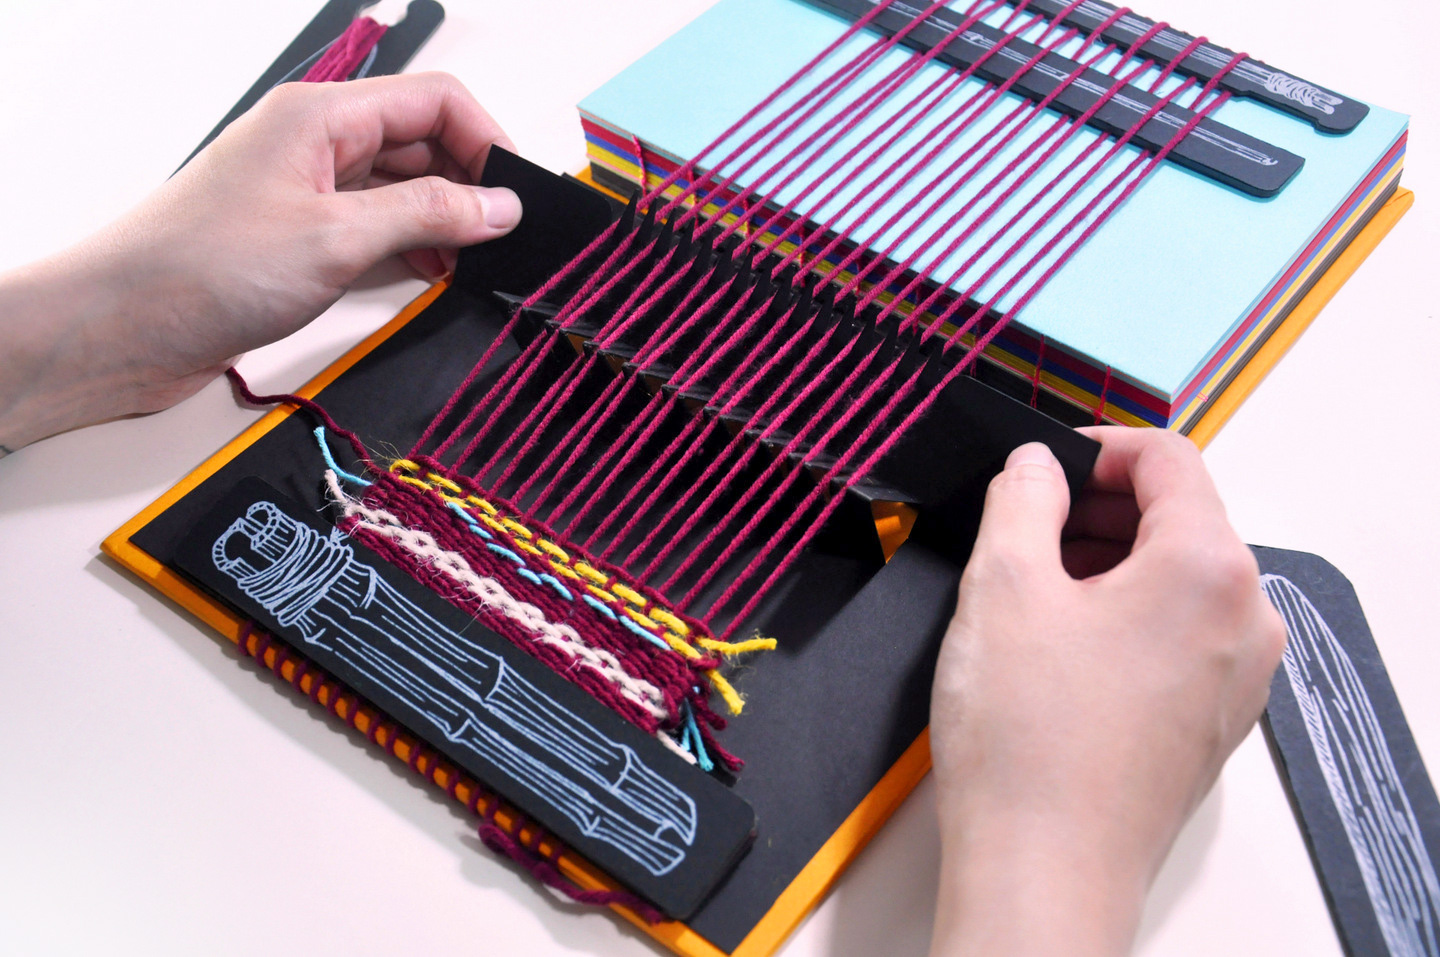 #This book opens up into a miniature fully-functional handloom machine that lets you weave cloth!